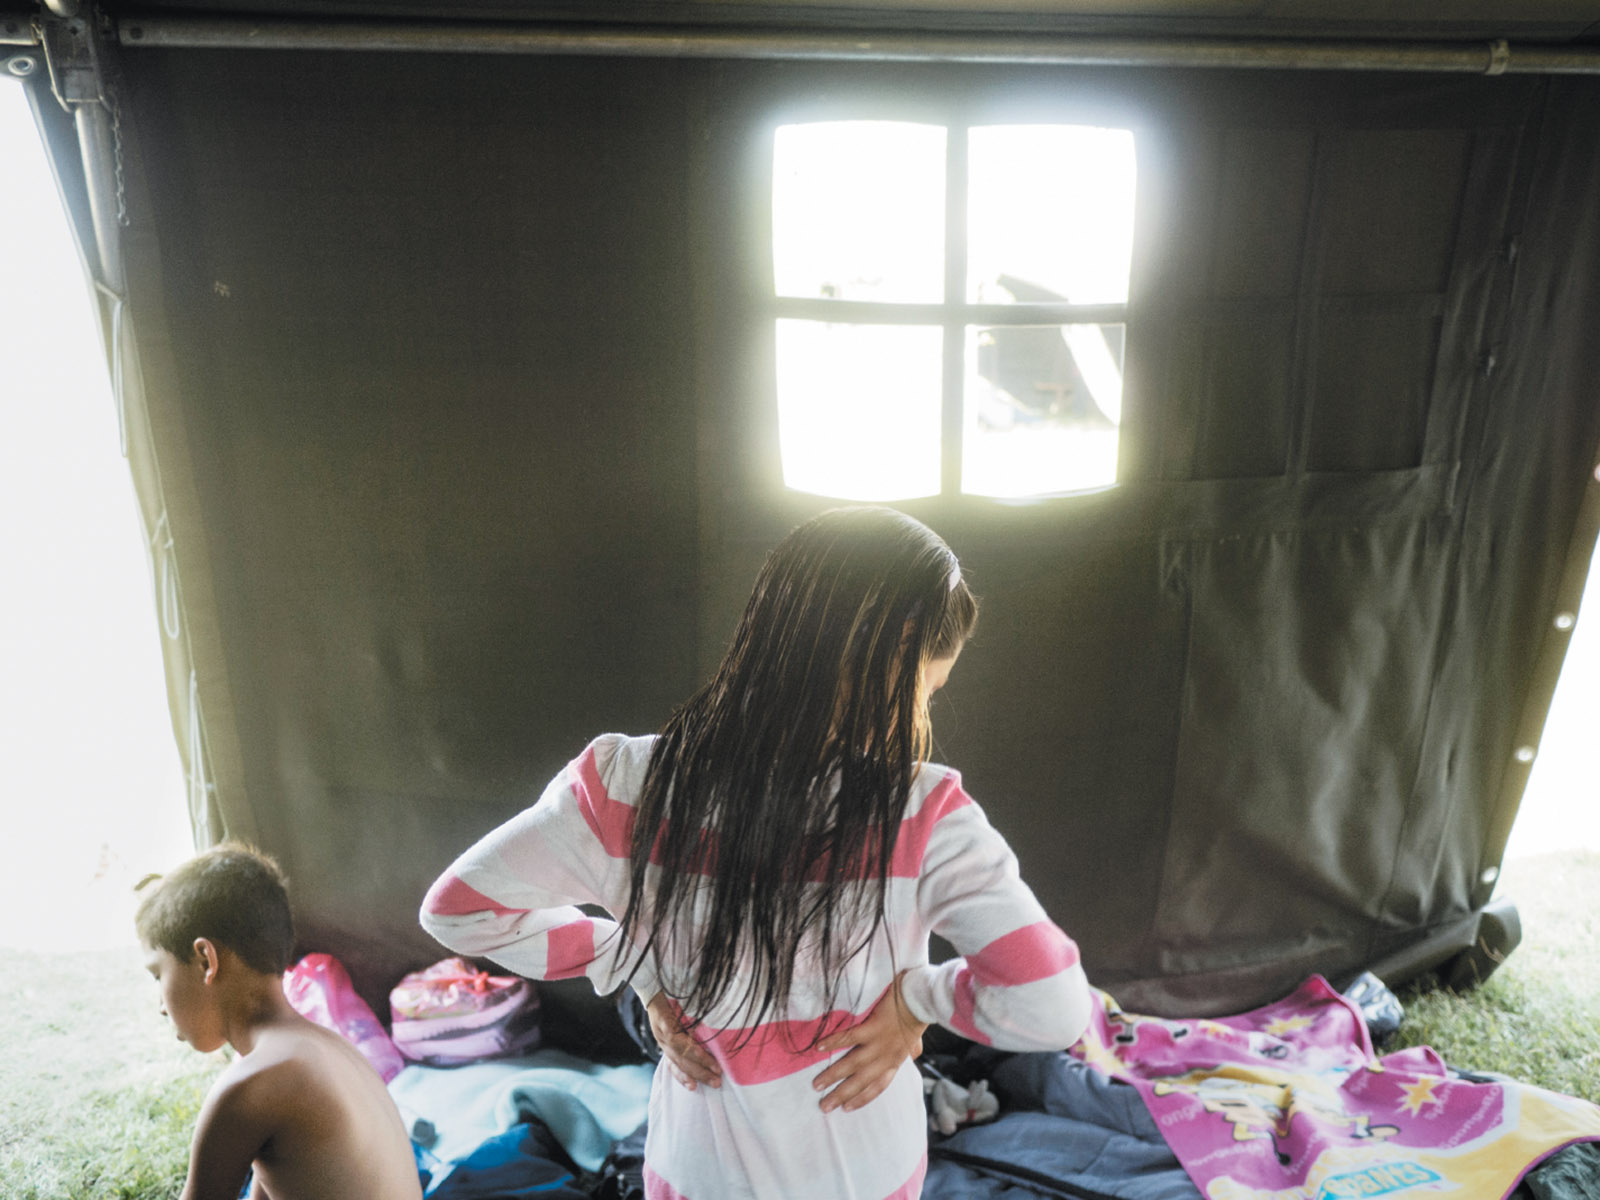 Syrian refugees resting at an aid center on the Serbian side of the border before attempting to cross into Hungary, August 2015